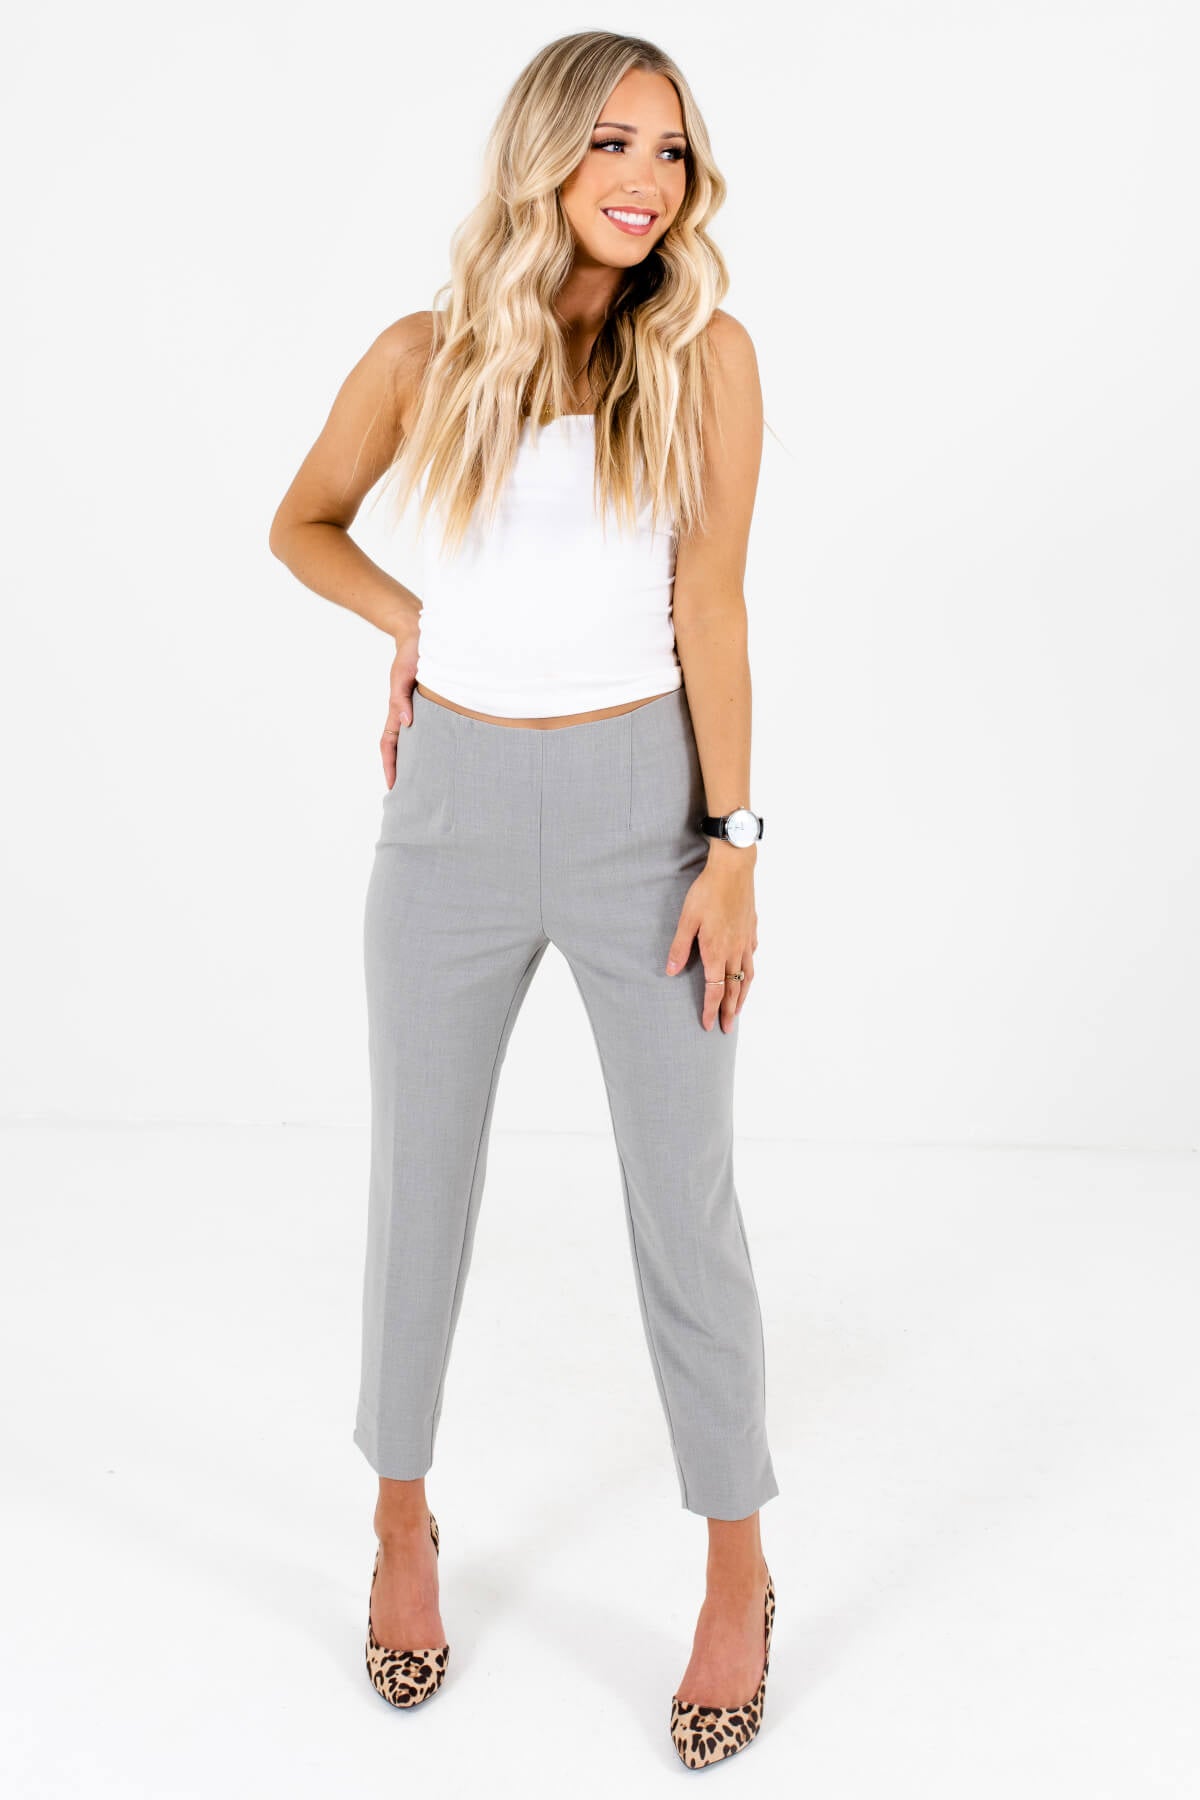 Cabo Grey Straight Leg High Waisted Tailored Pant | Grey dress pants  outfit, Tailored pants outfit, Dress pants outfits